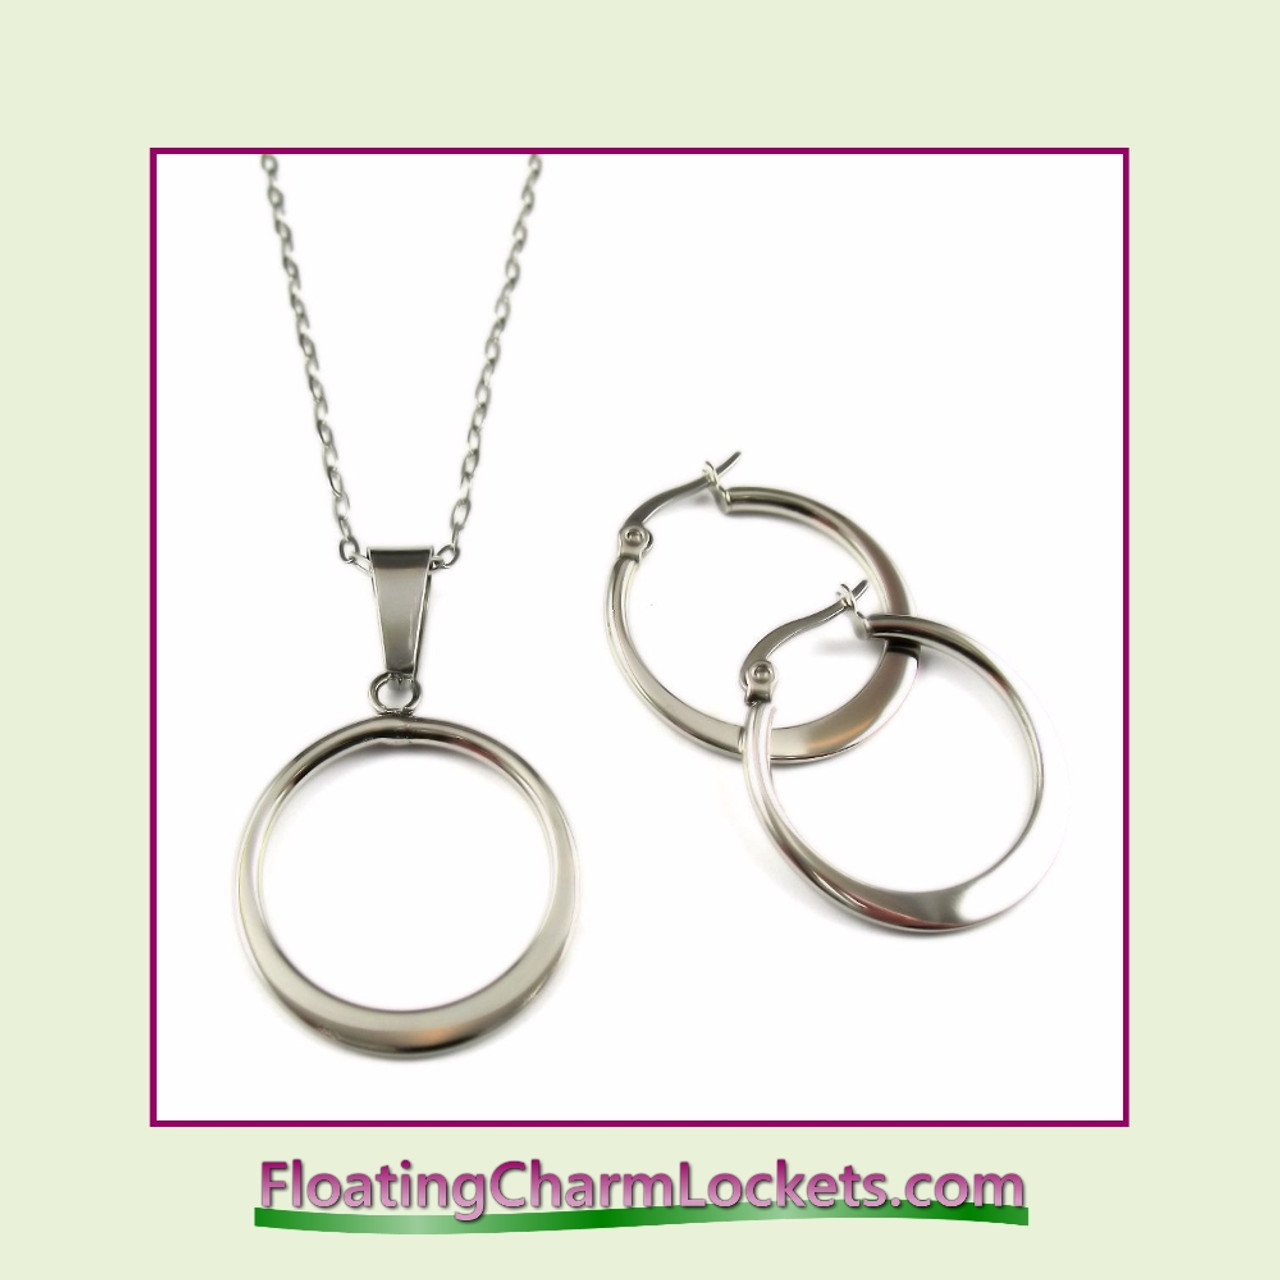 Stainless Steel Jewelry Set - Circle Pendant and Earrings